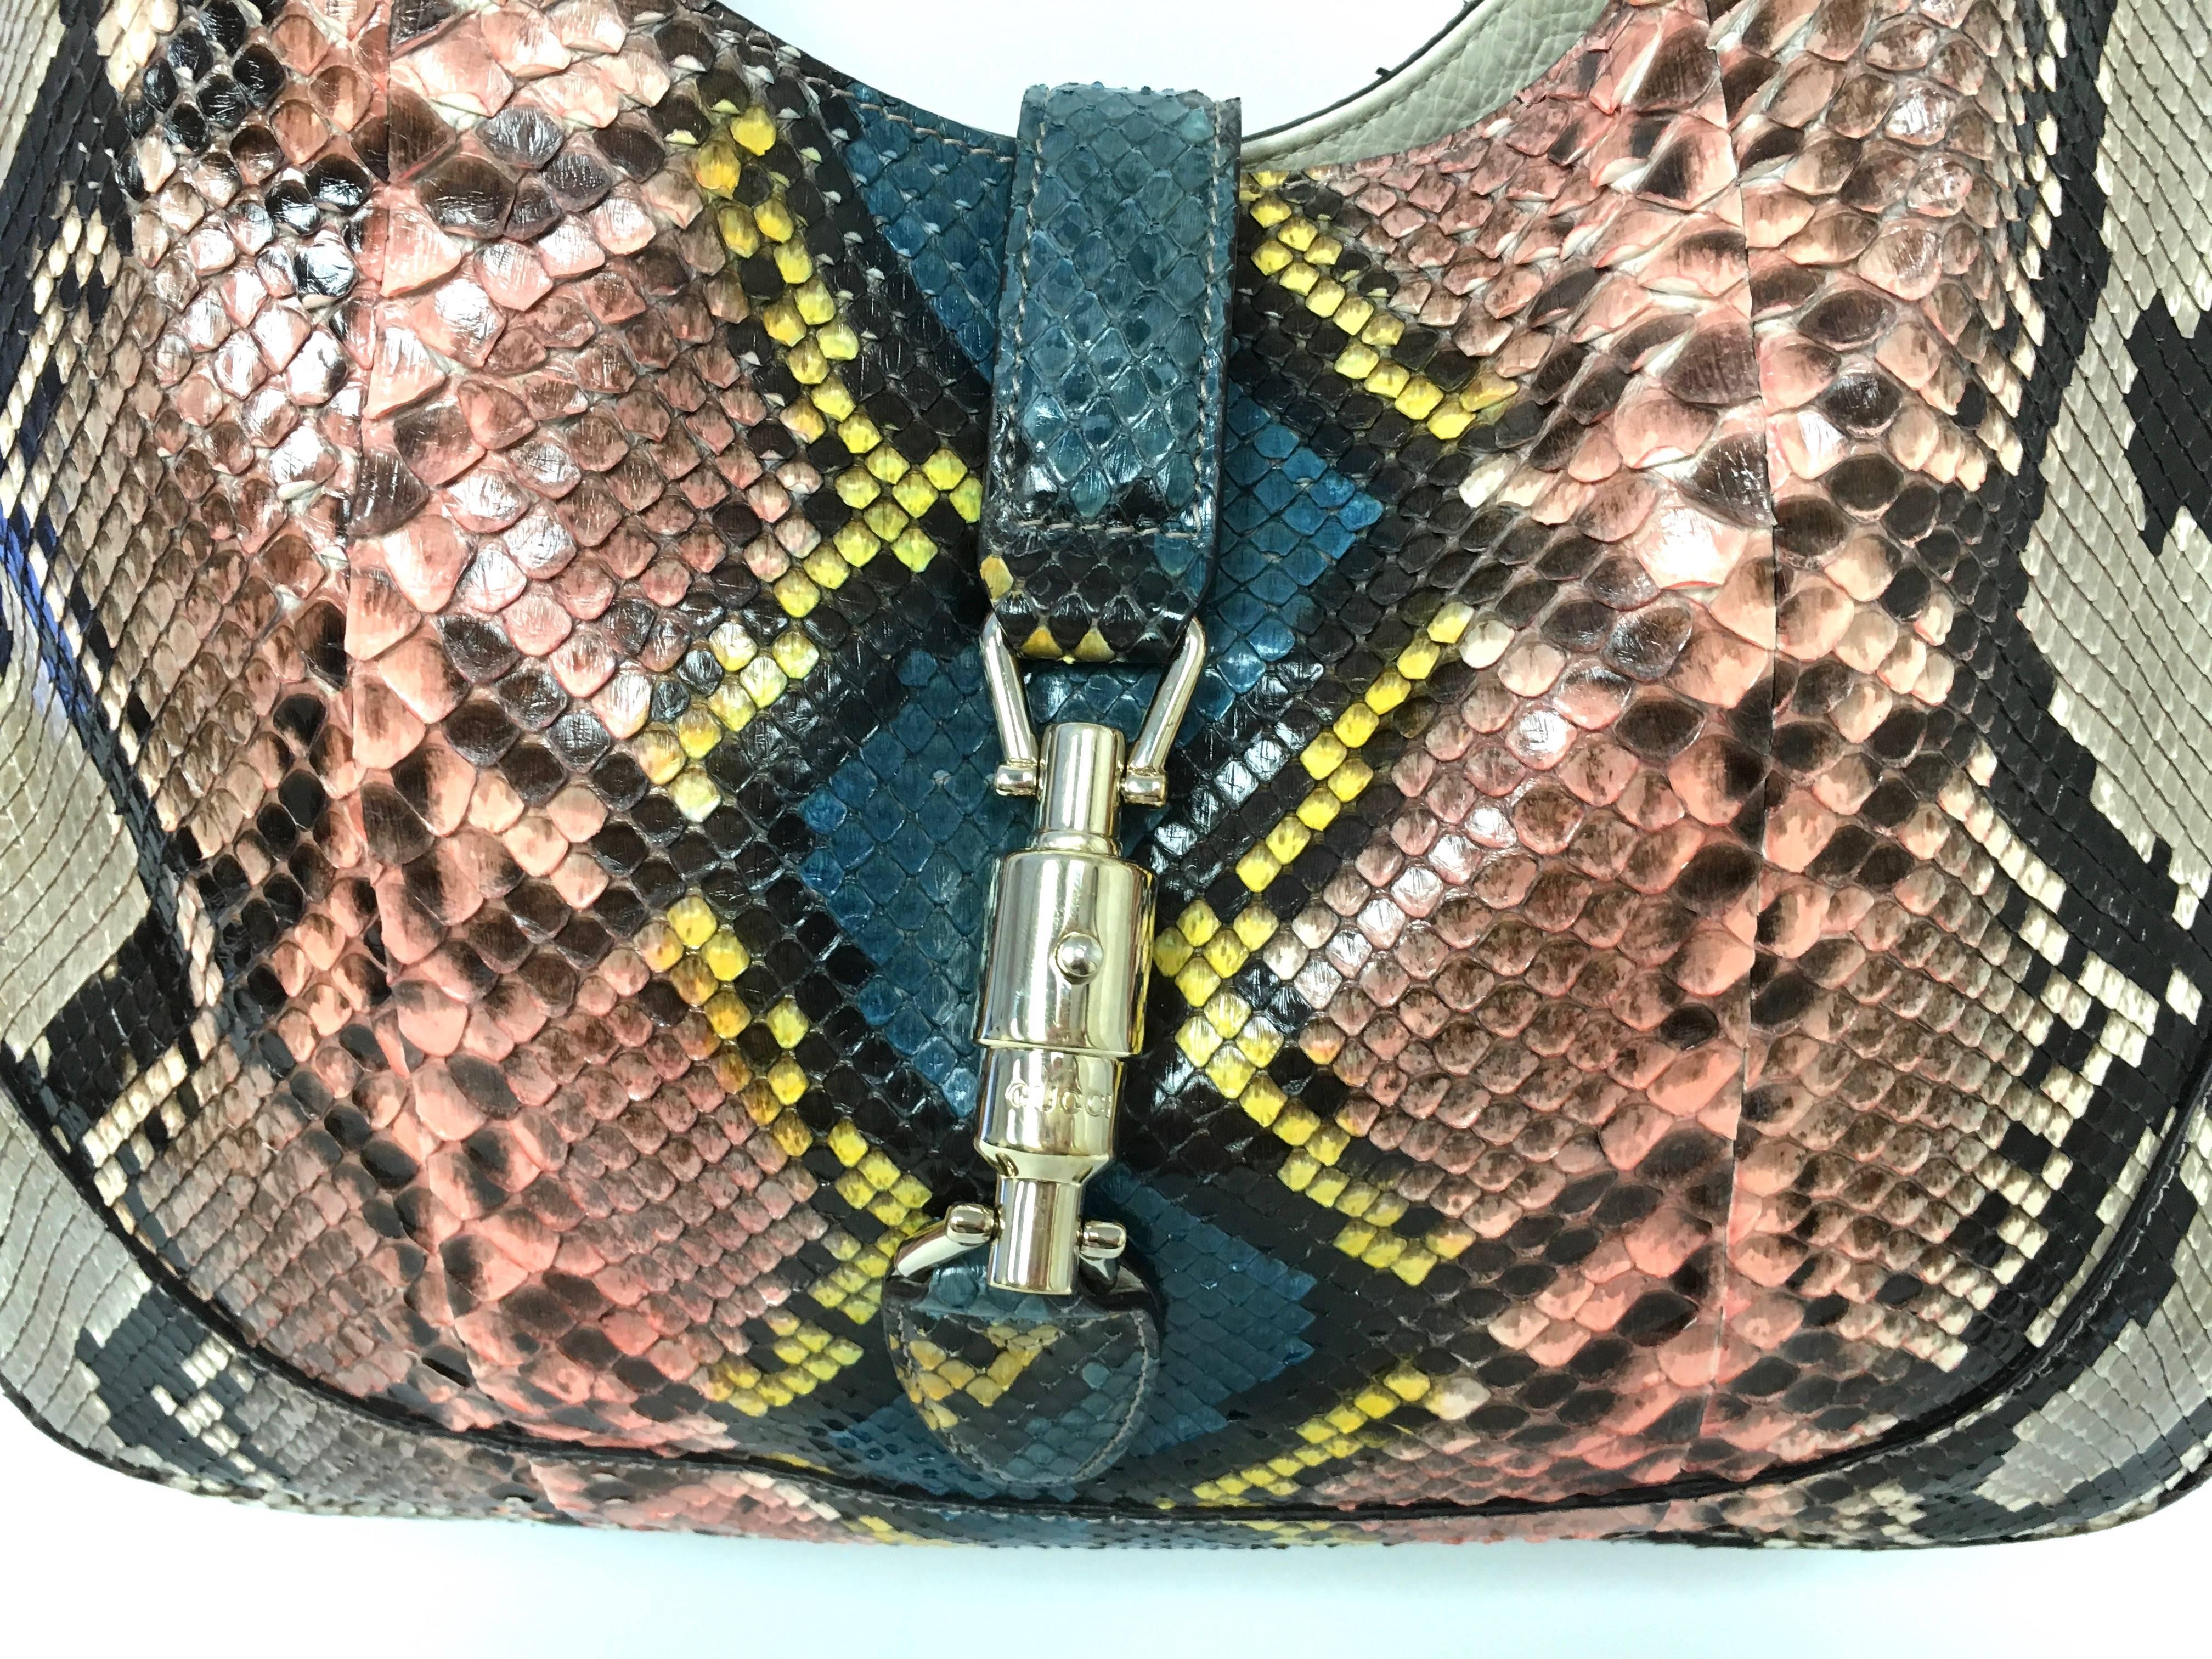 Authentic Gucci Jackie Python Las Vegas Bag
Retail was: $3,800.00 Sold Out!
Python skin defines this roomy carryall.
Adjustable and detachable shoulder strap, 8¾-19¾